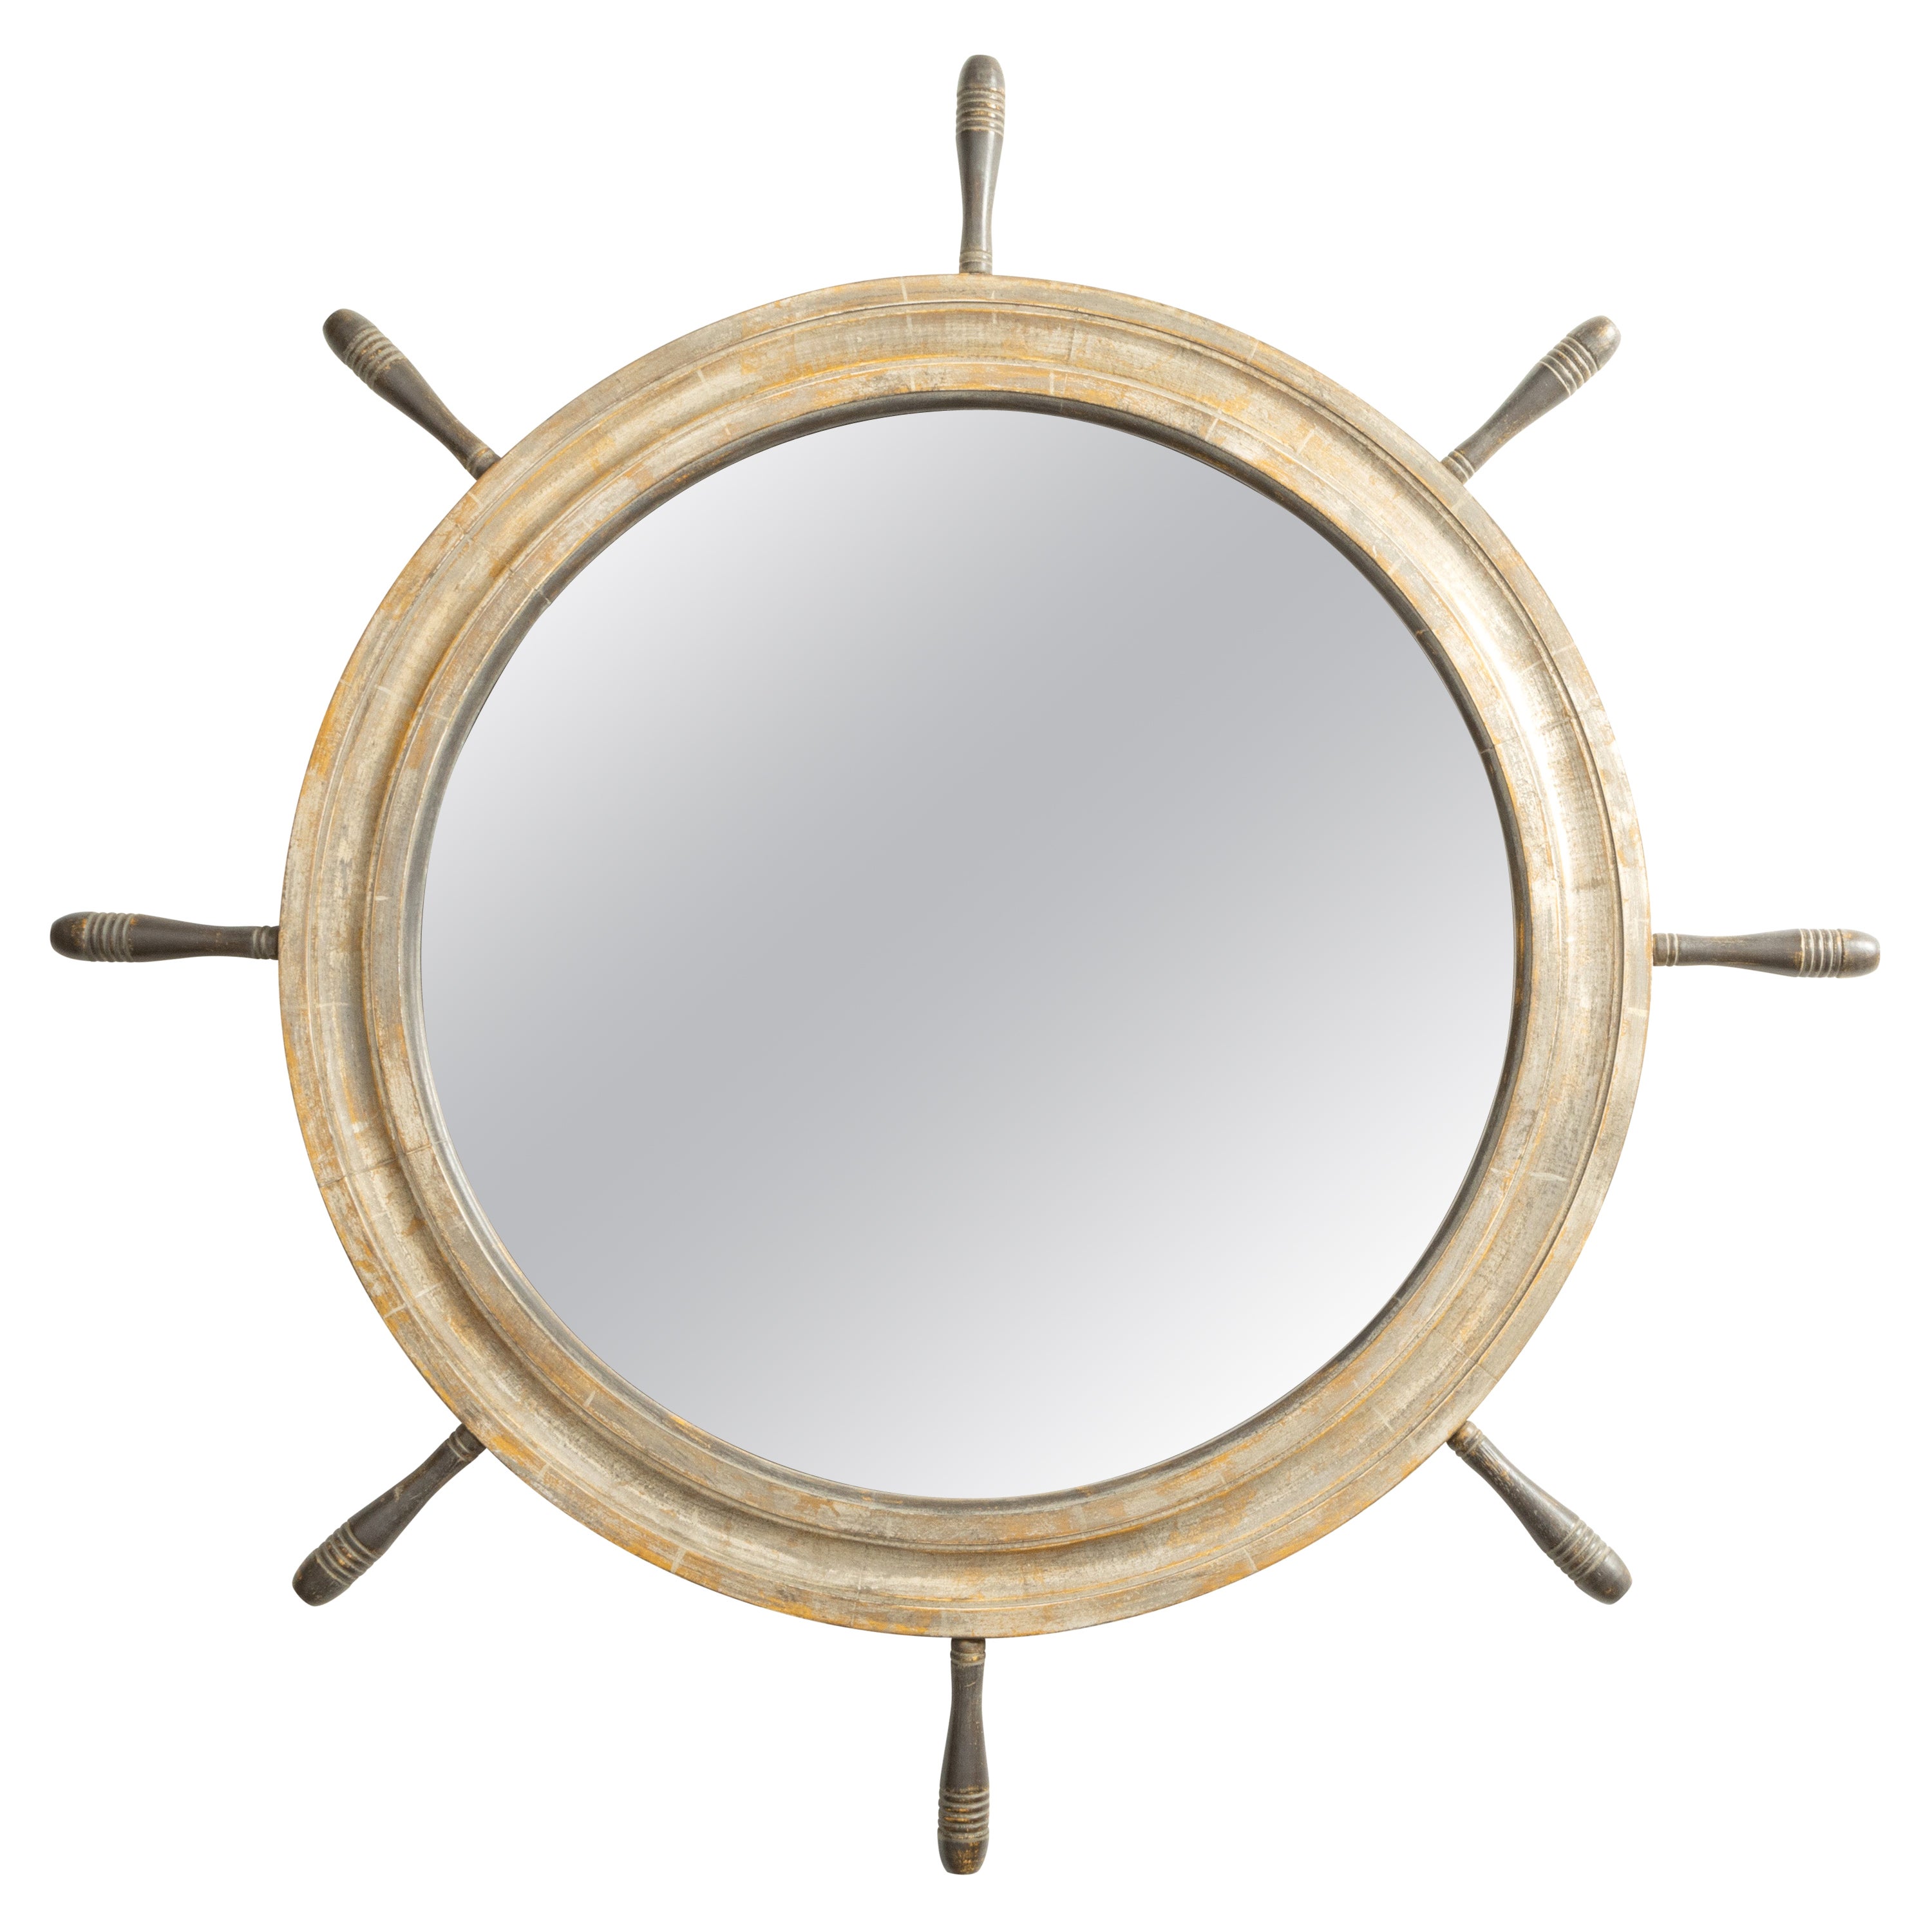 English Midcentury Period Ship Wheel Shaped Mirror with Distressed Patina For Sale